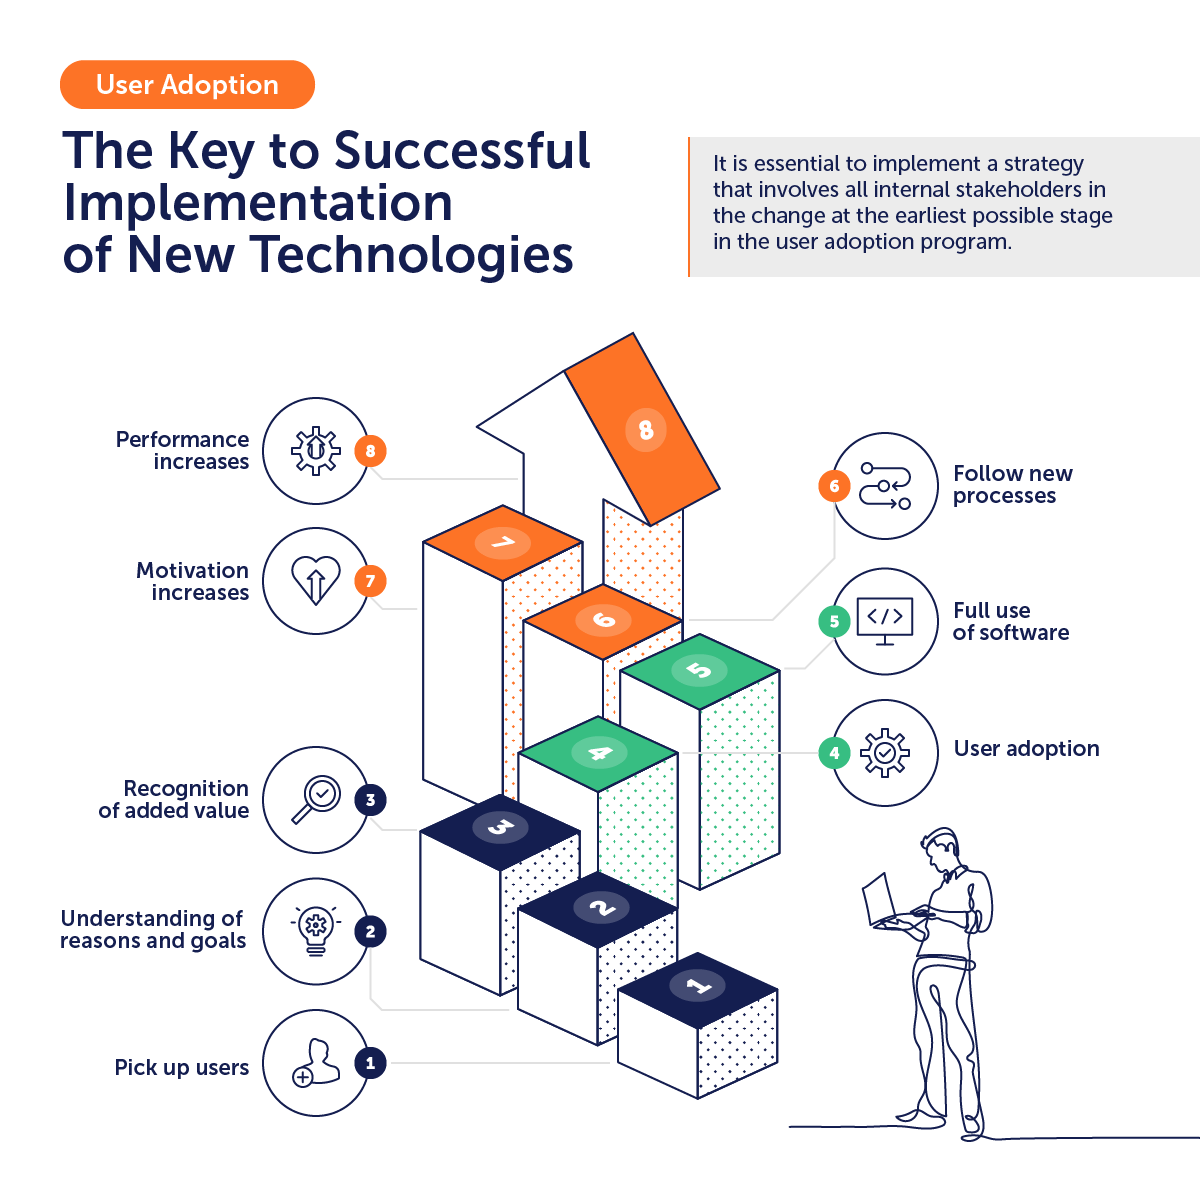 tts-digital-adoption-solutions-key-to-successful-implemetation-of-new-technologies